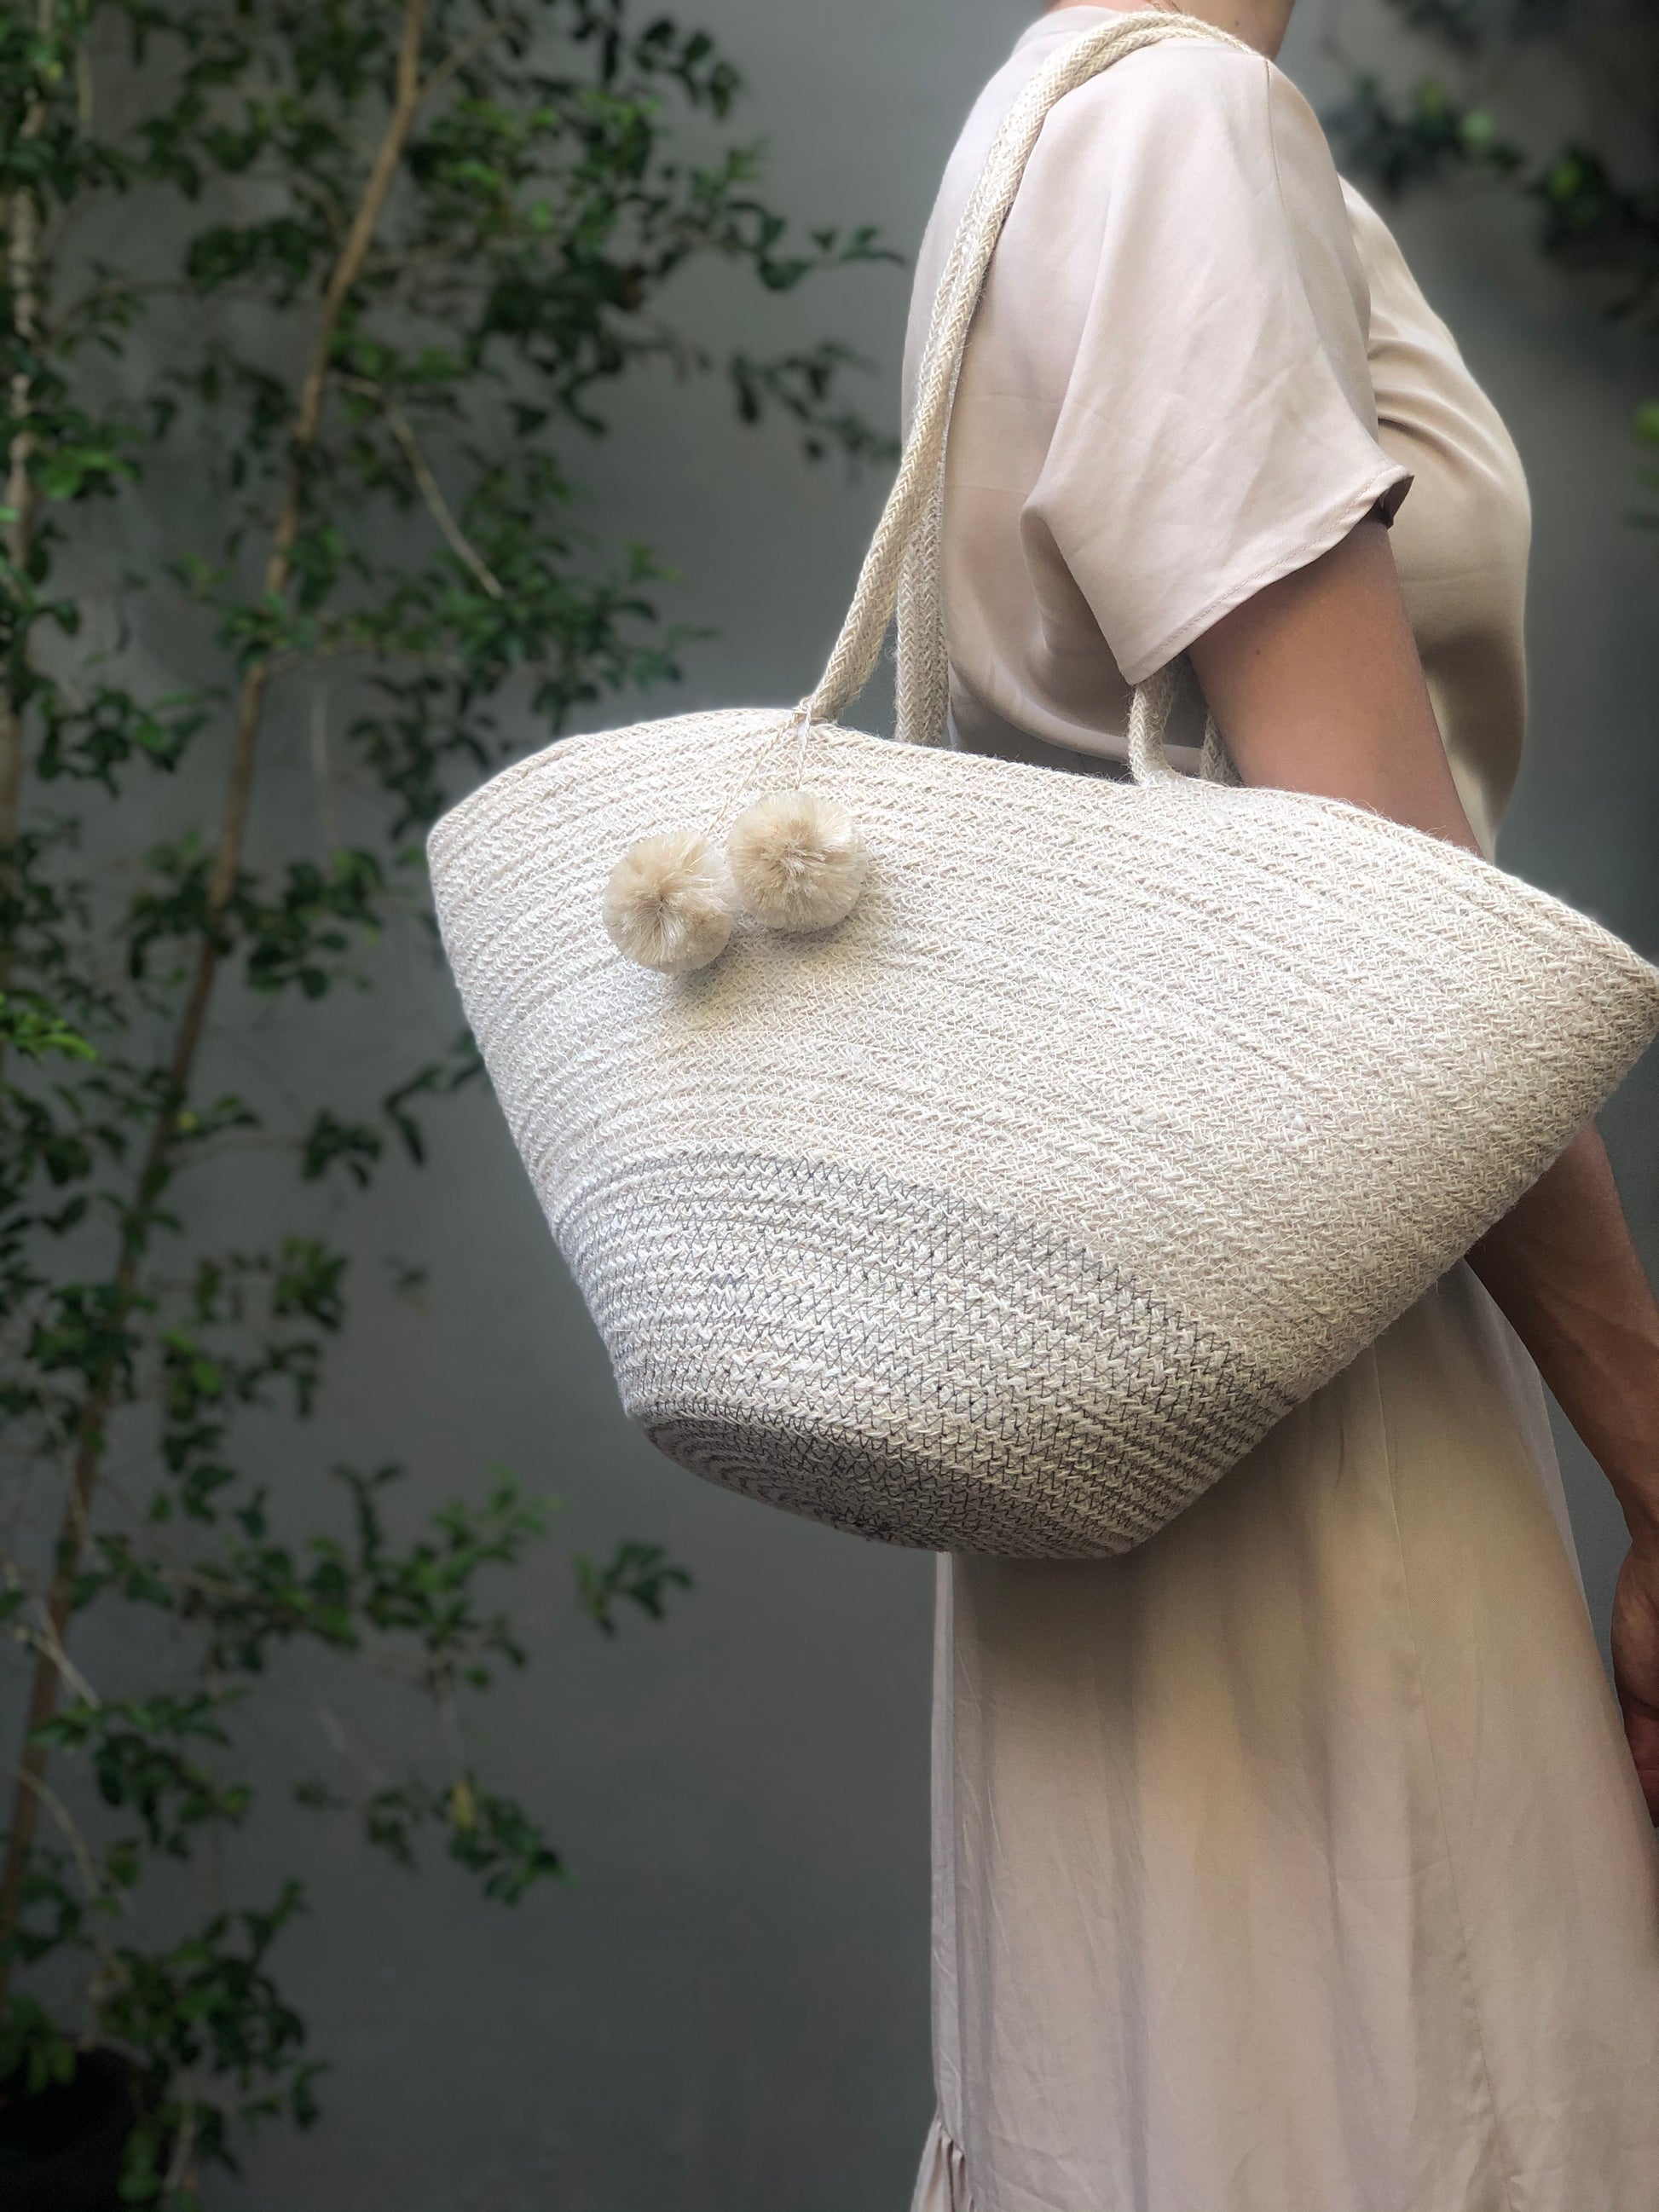 Fair Trade Sustainably Handwoven Eco-friendly Jute bag